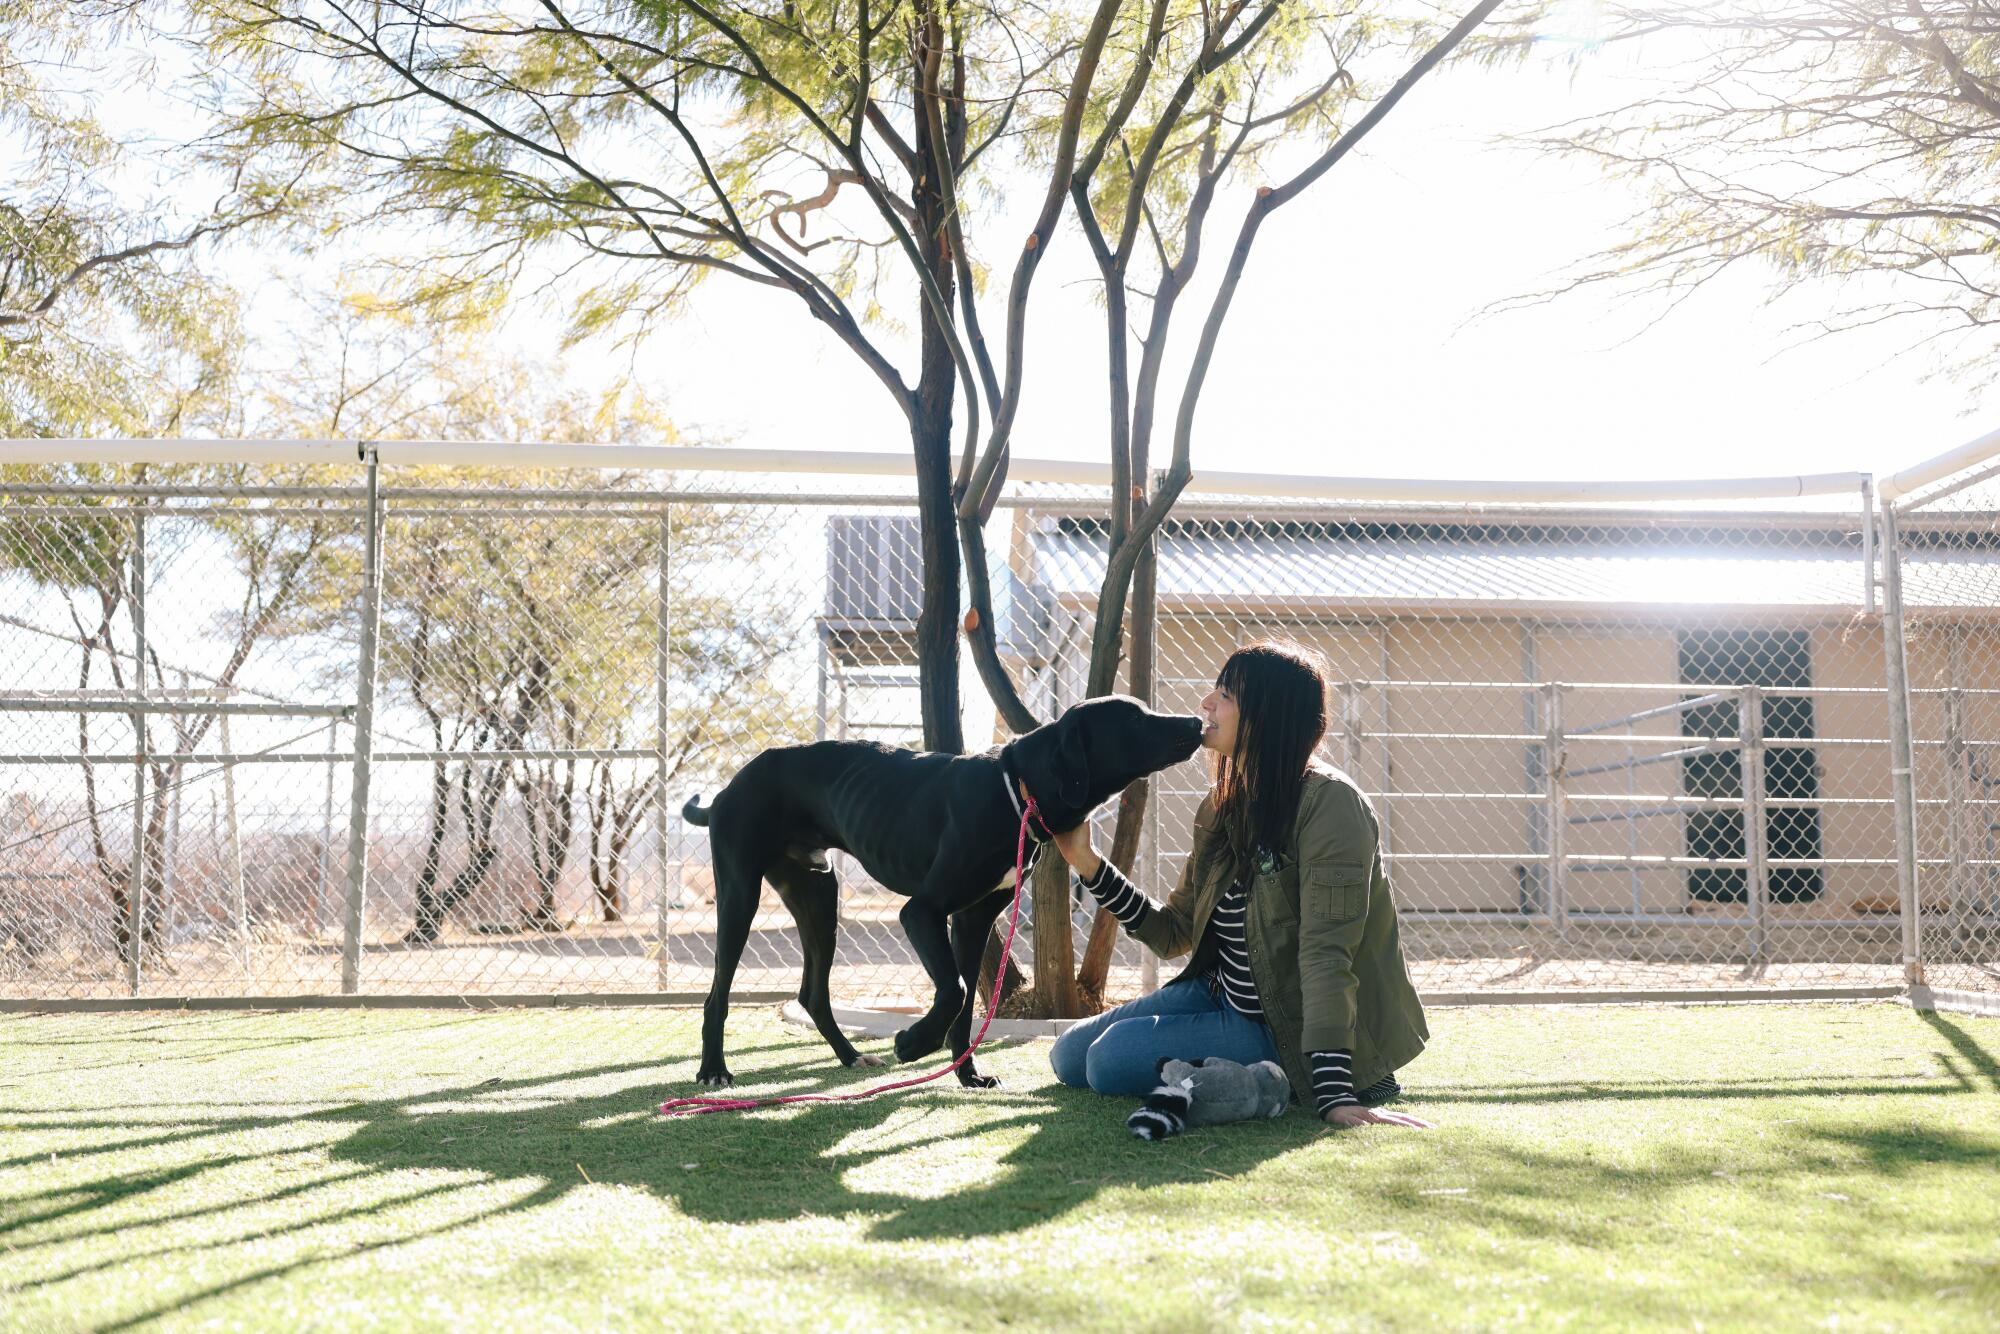 Rita Earl Blackwell pets a large black dog, approaching her for a kiss as she sits on the grass.